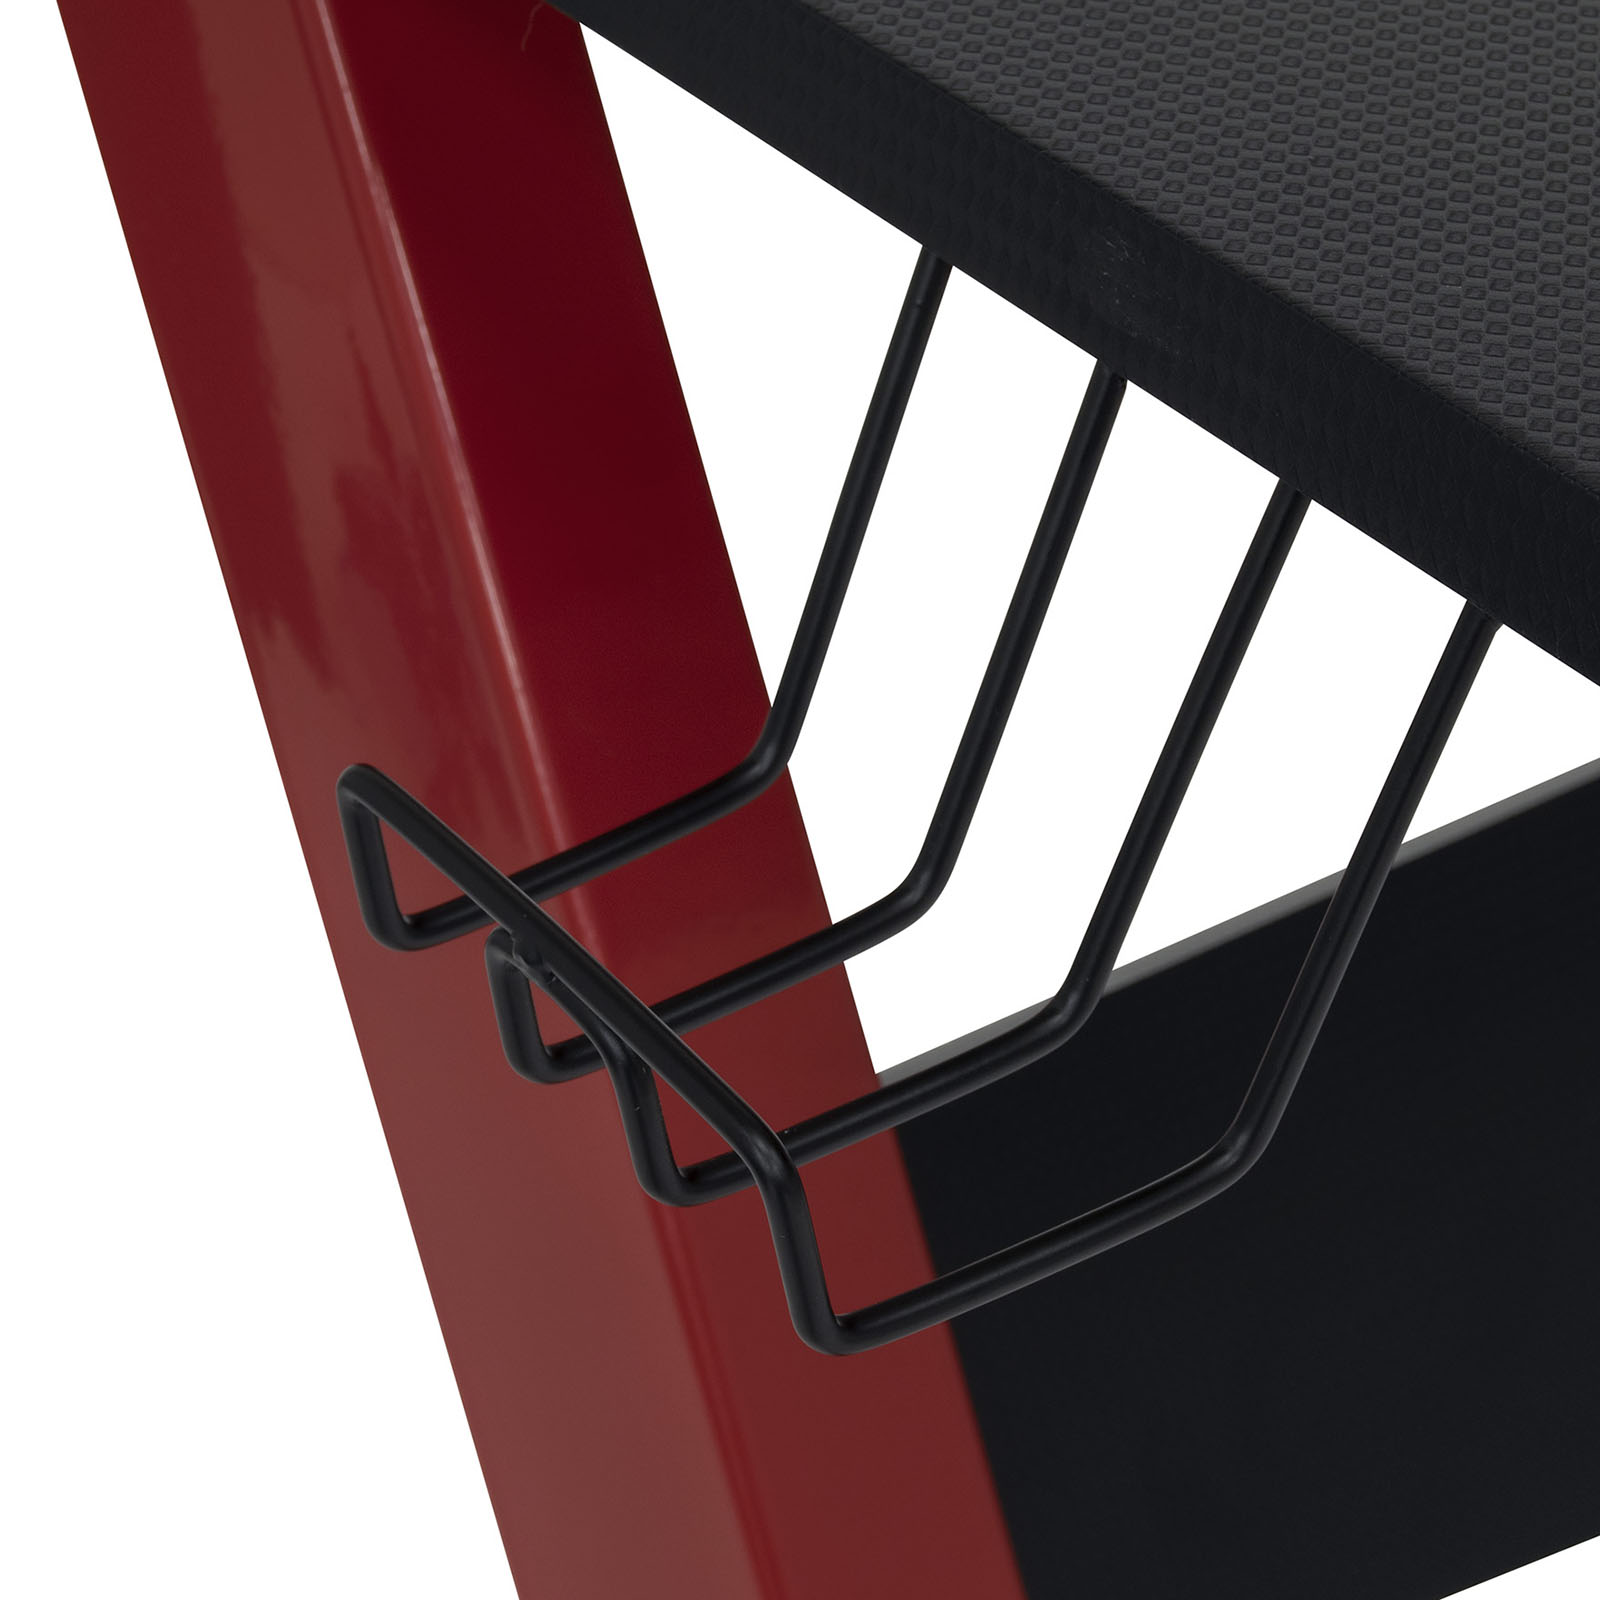 SD STUDIO DESIGNS Overlord Gaming Table Black,red